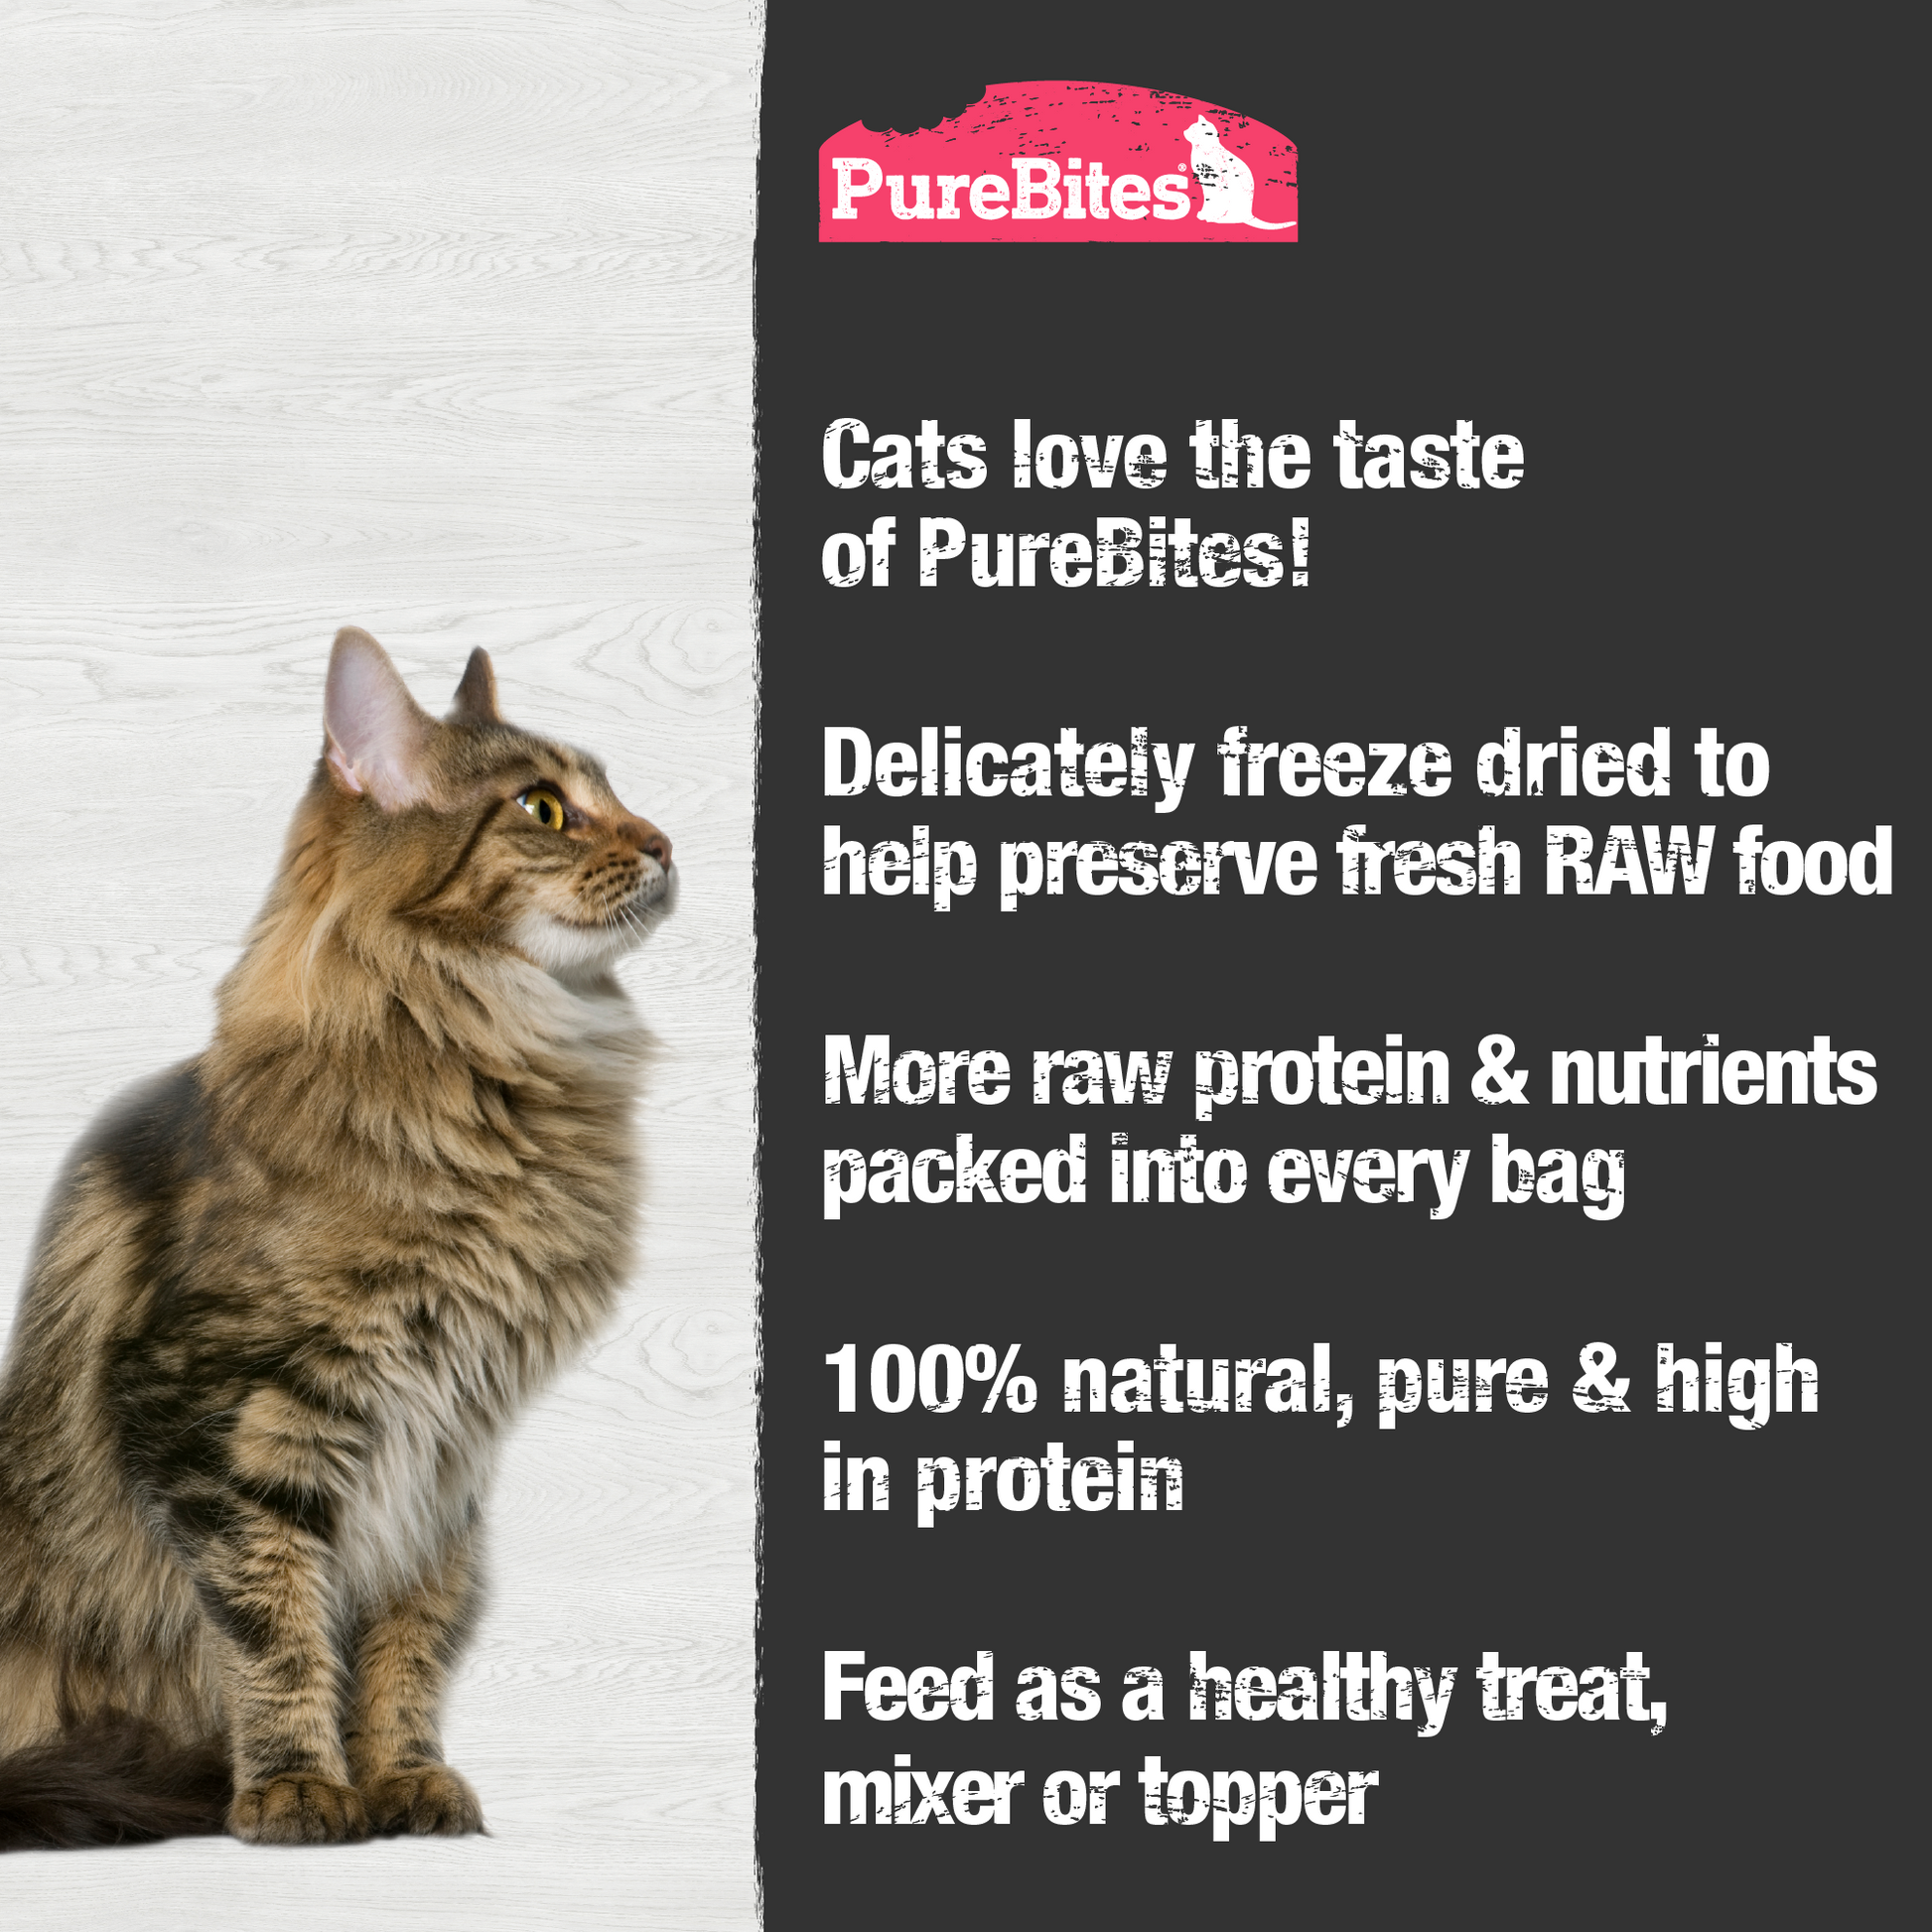 Made fresh & pure means more RAW protein and nutrients packed into every bag. Our shrimp is freeze dried to help preserve its RAW taste, and nutrition, and mirror a cat’s ancestral diet